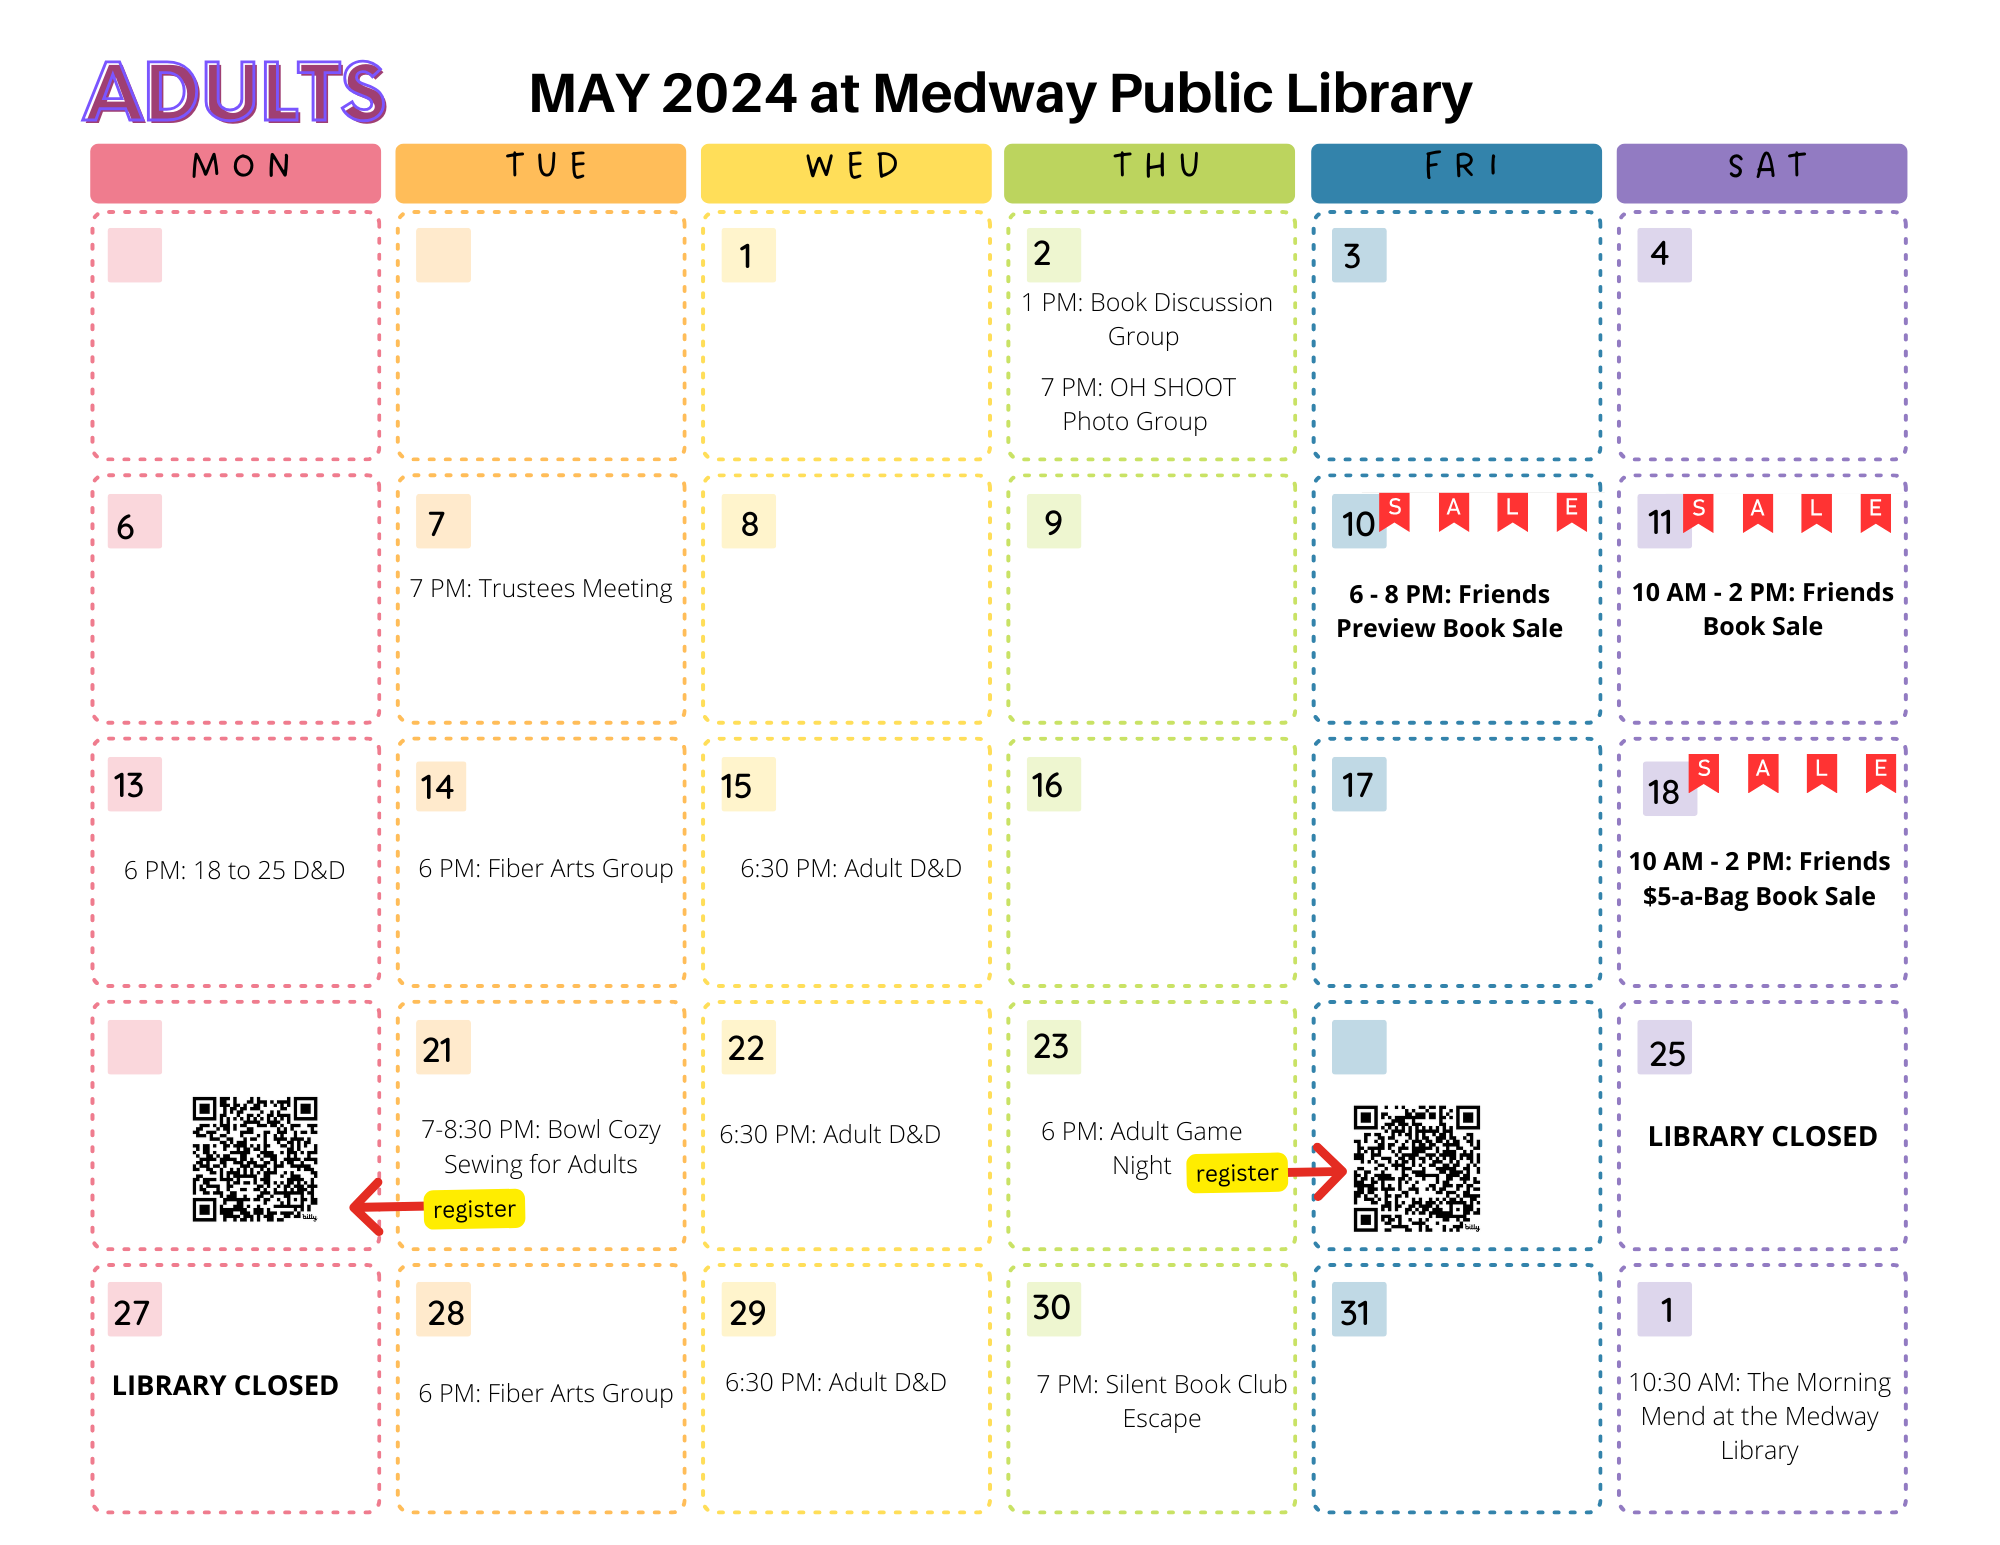 MAY 2024 Adult events